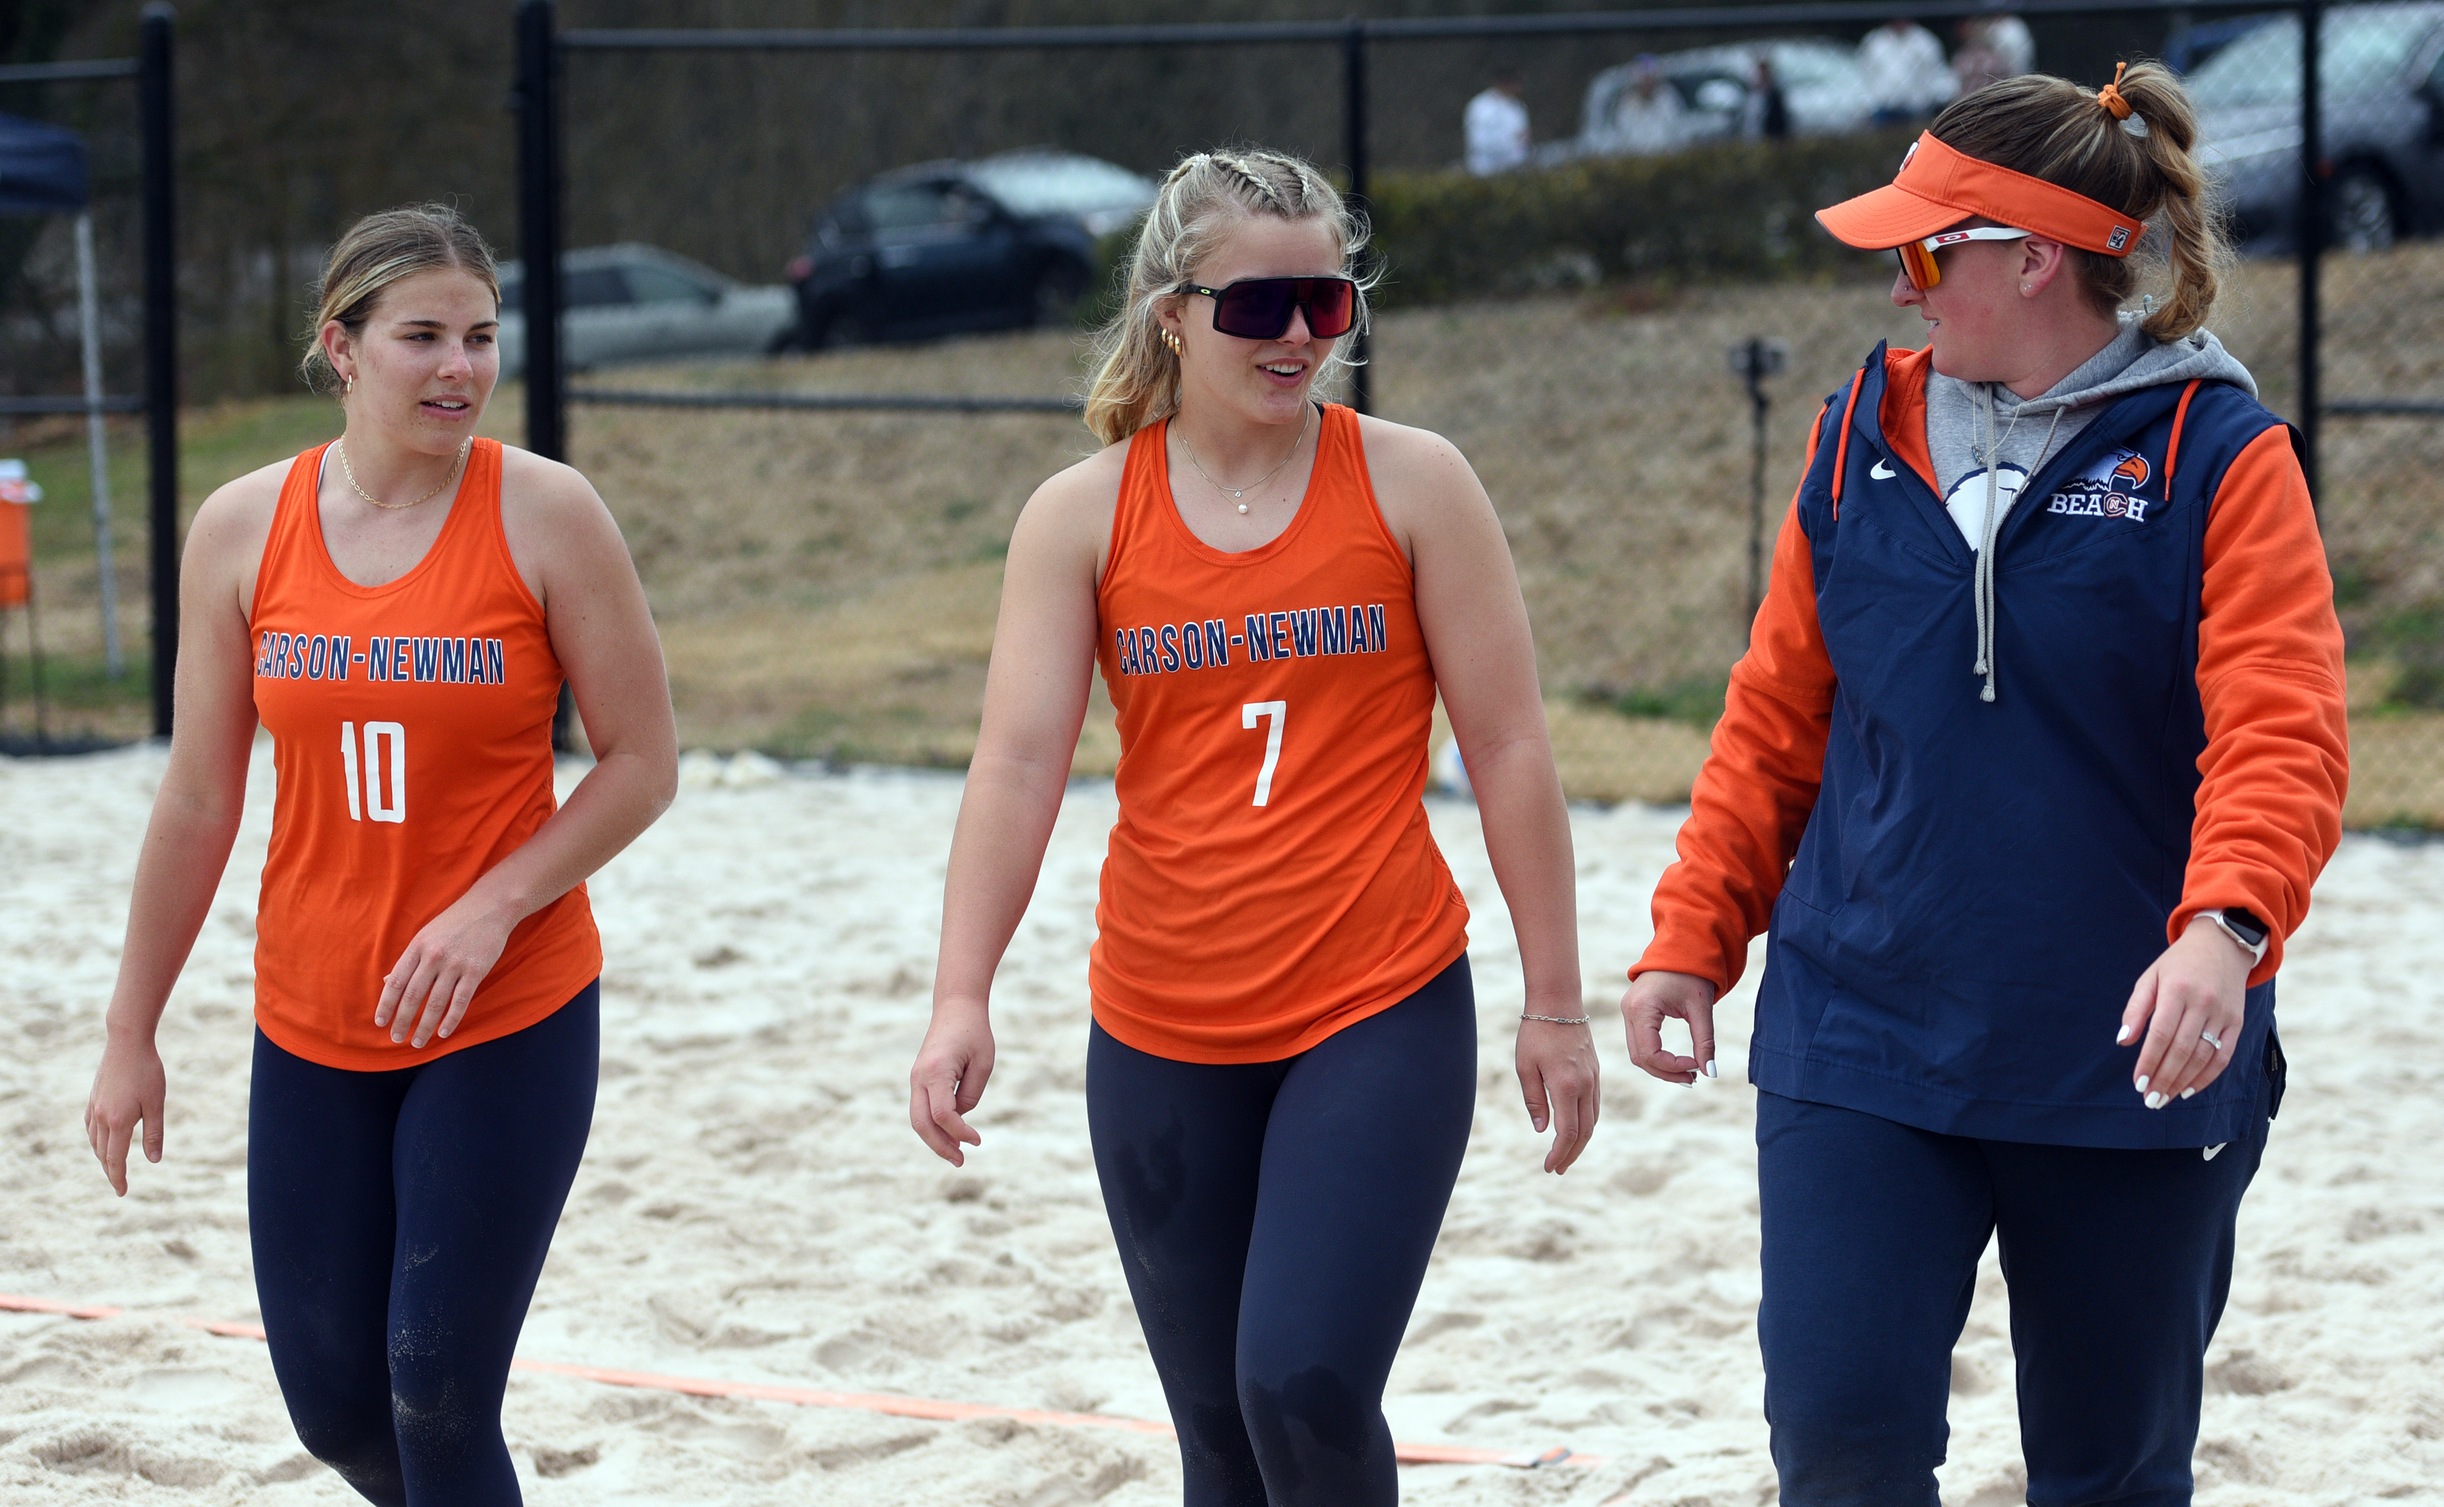 Beach finishes weekend at UNA 0-4